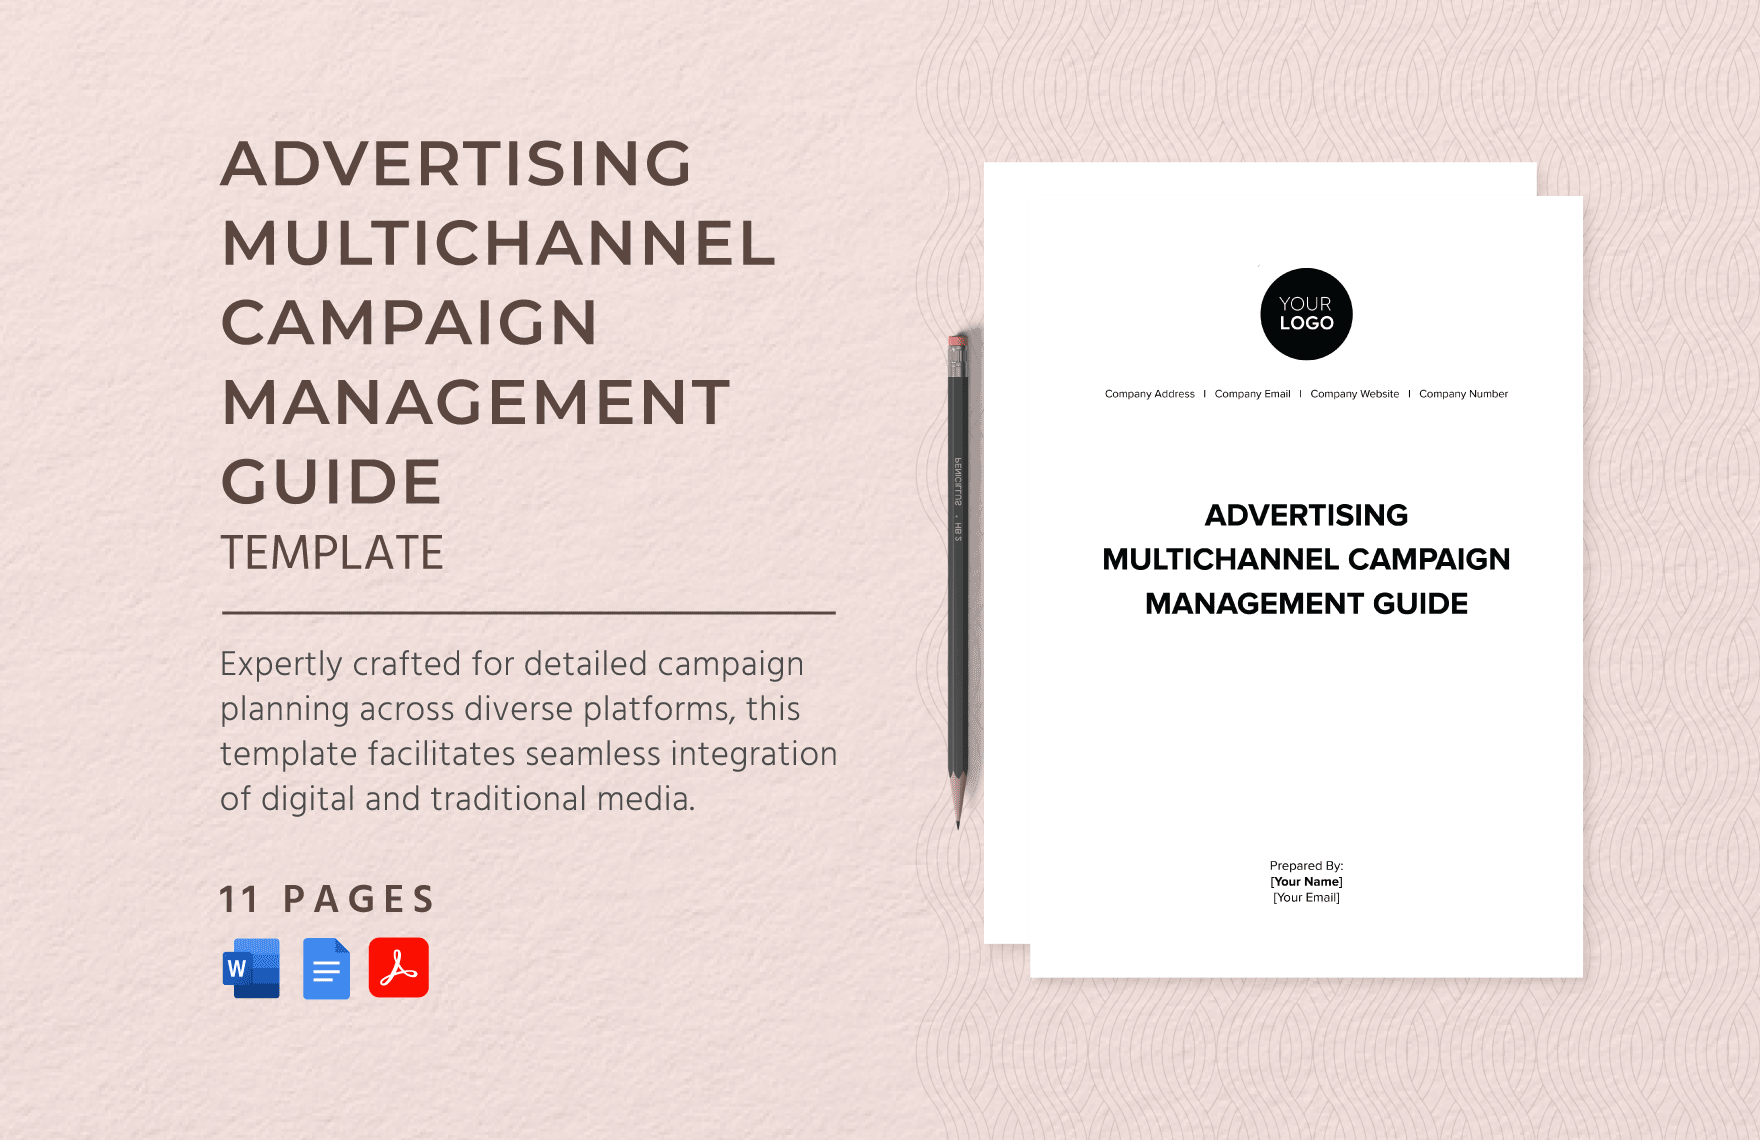 Advertising Multichannel Campaign Management Guide Template